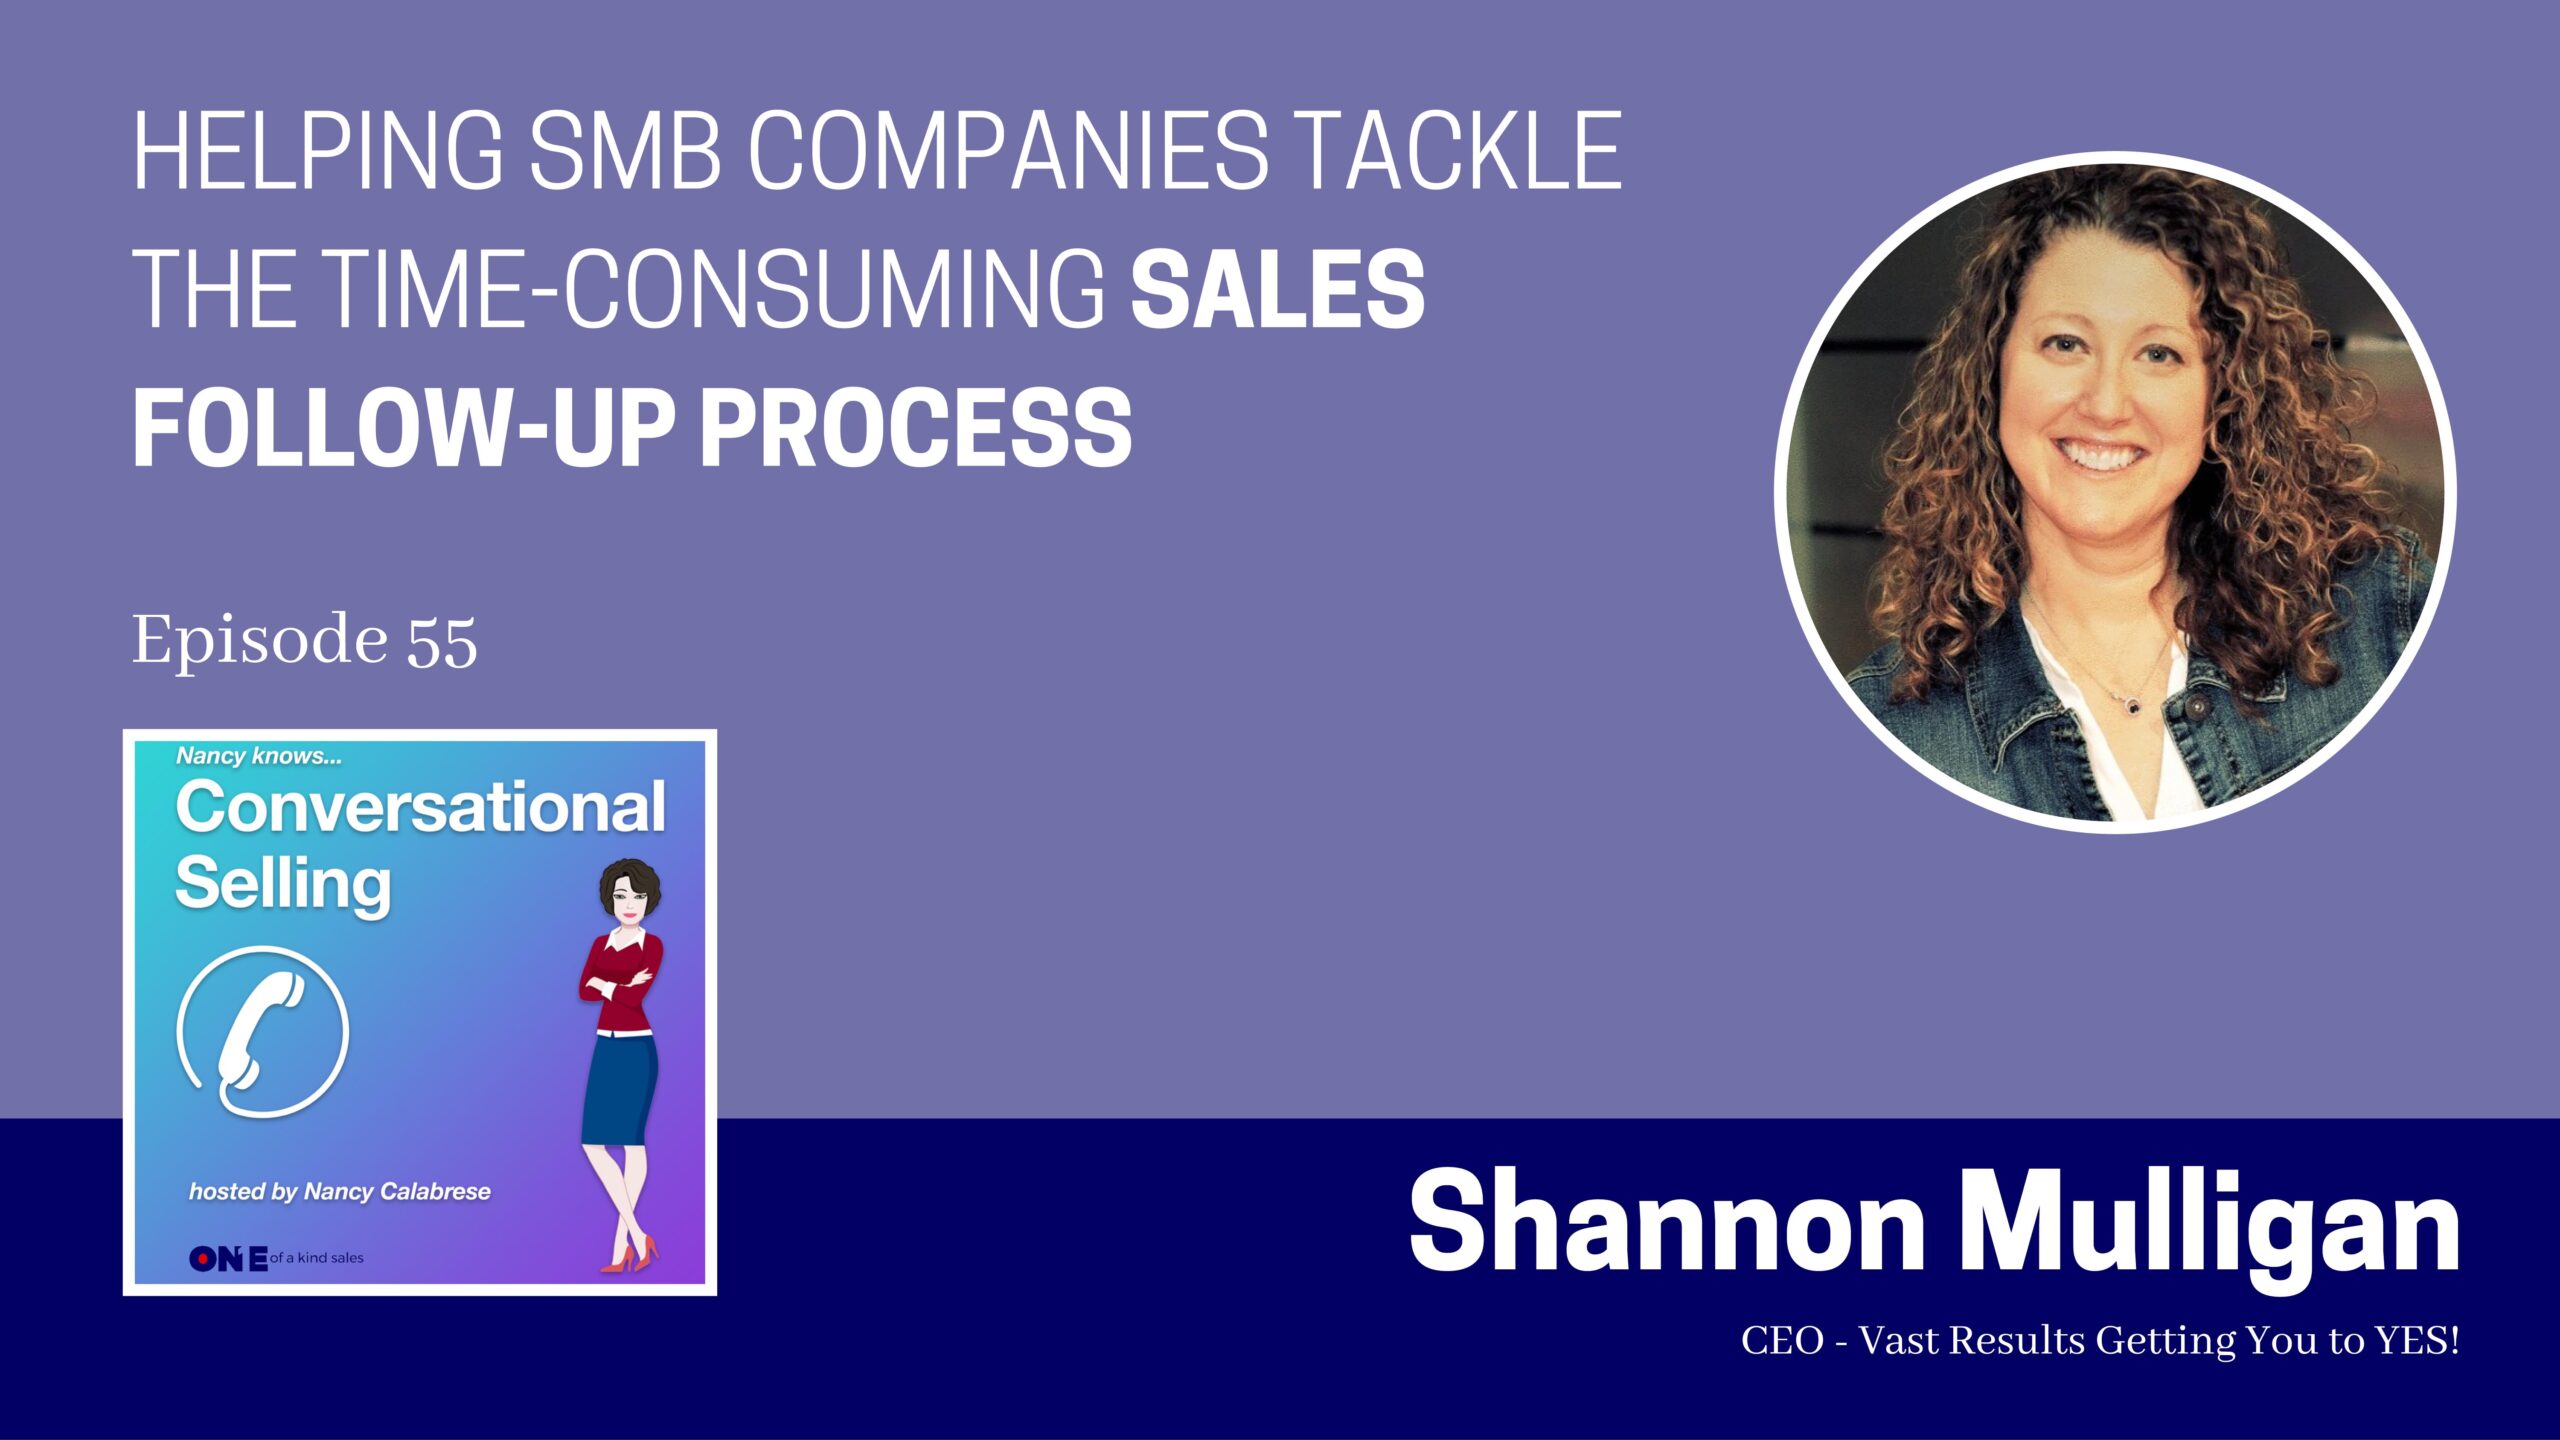 Shannon Mulligan | Helping SMB Companies Tackle The Time-Consuming Sales Follow-Up Process